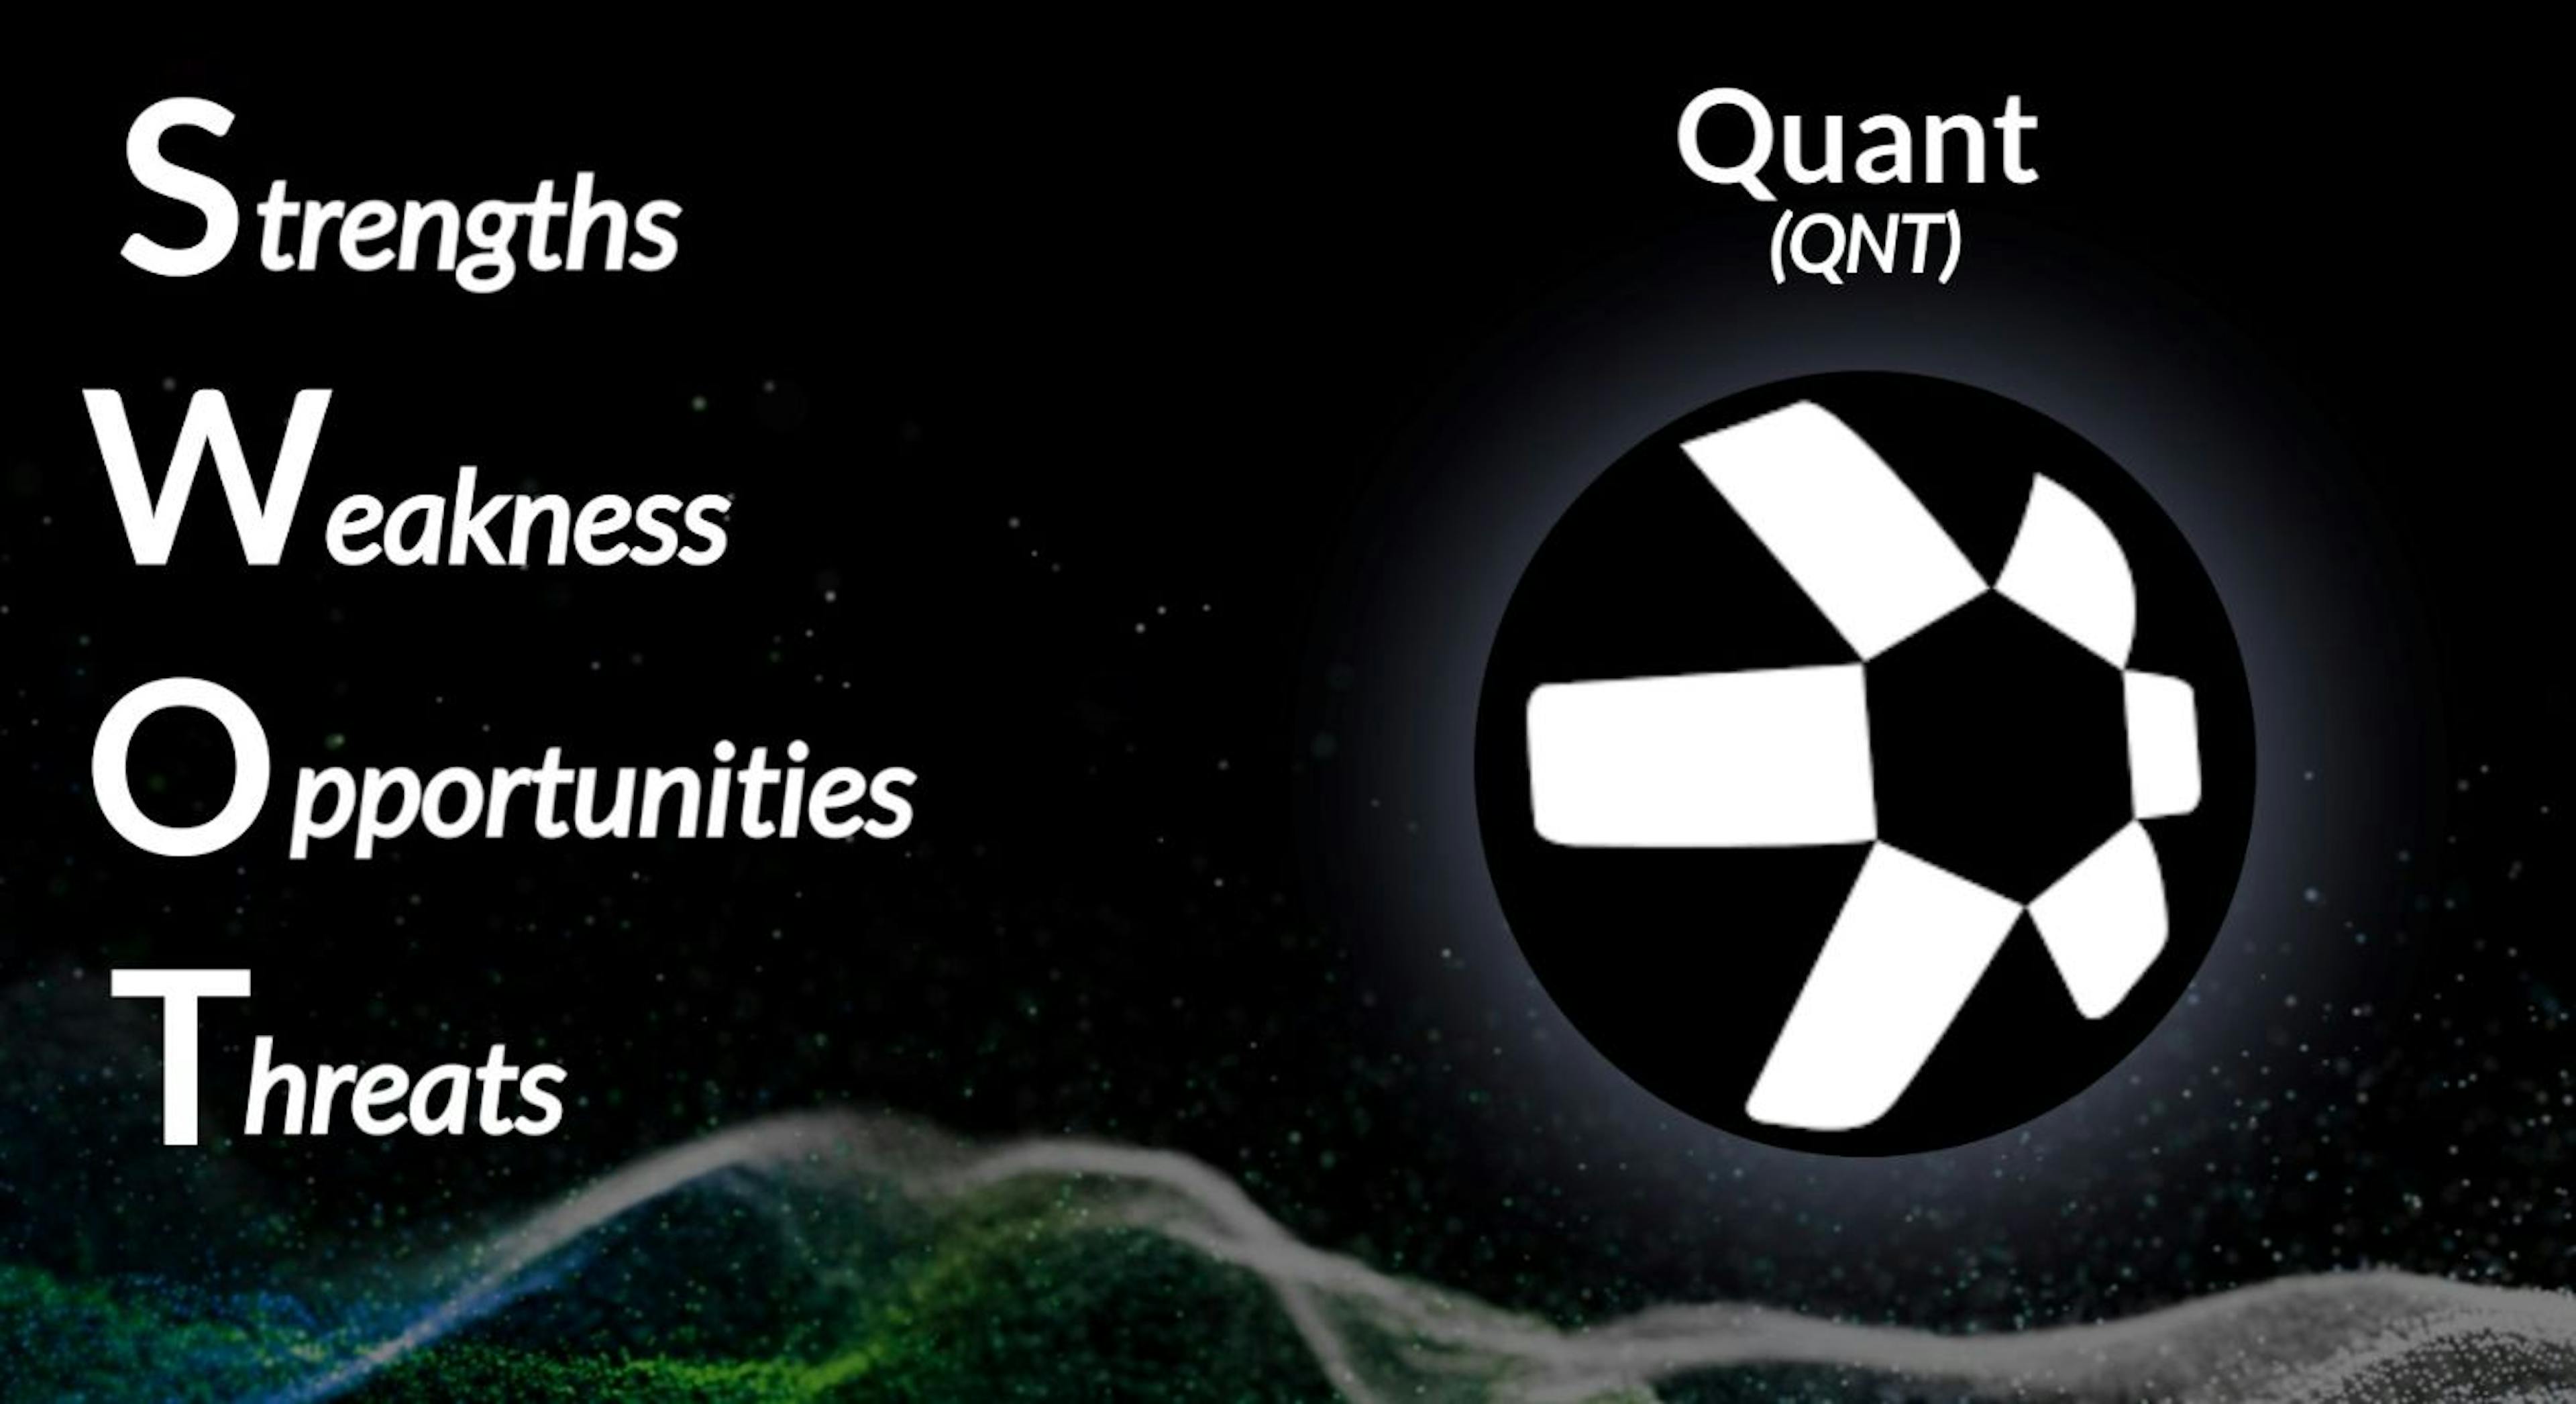 featured image - Die Quant Network (QNT) SWOT-Analyse